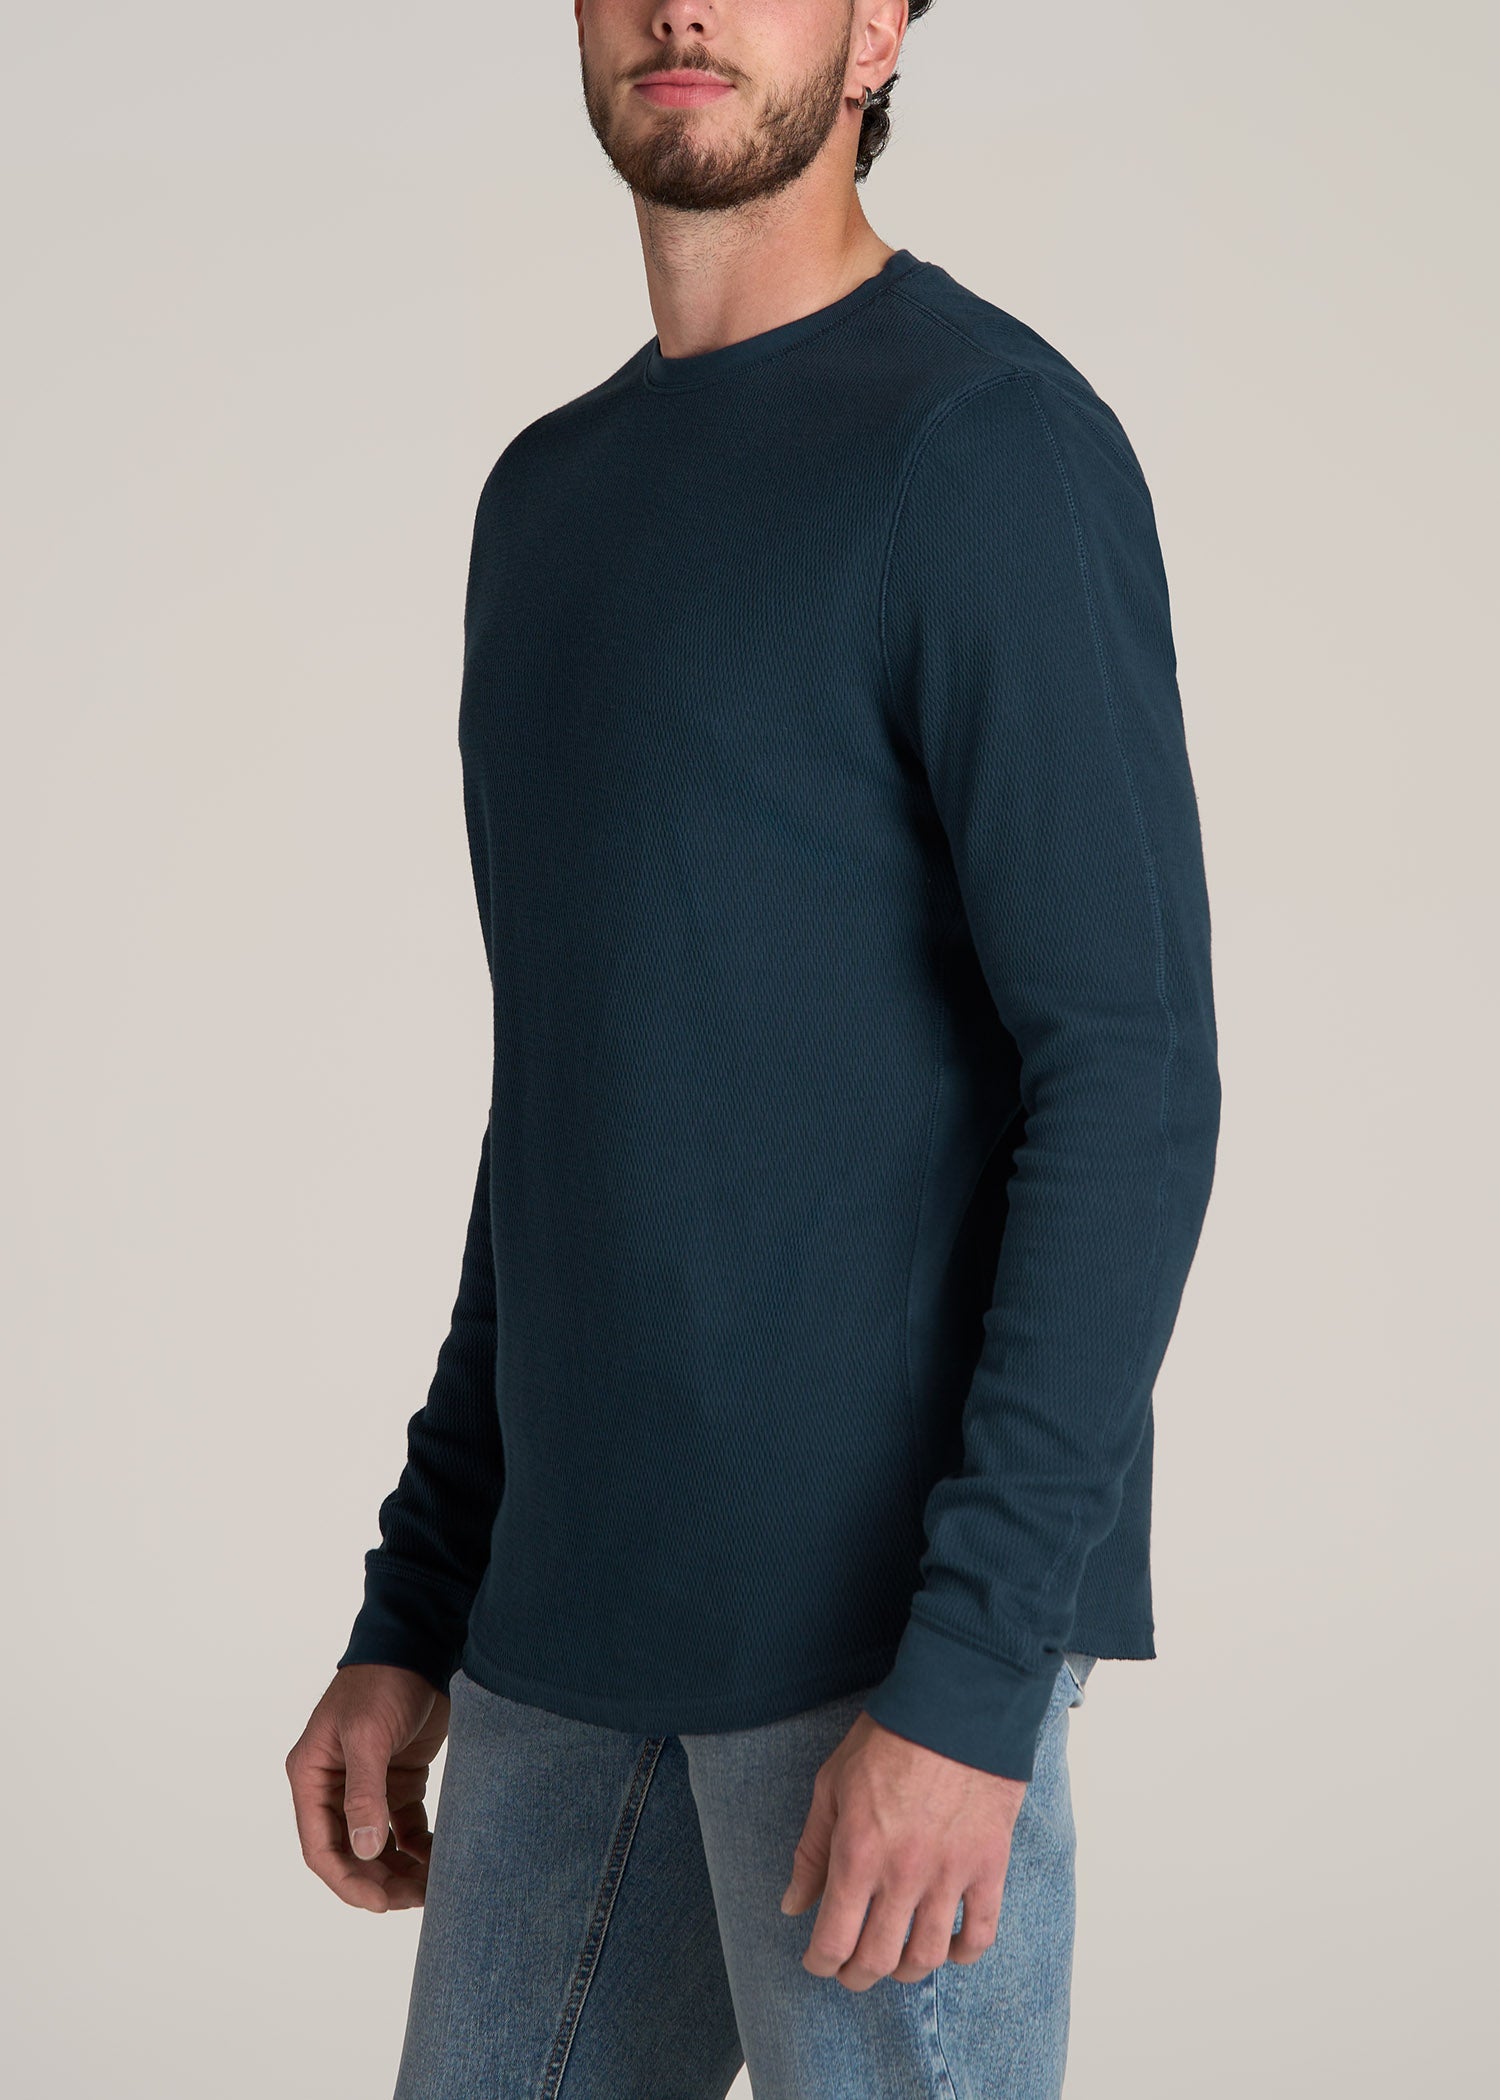 American-Tall-Men-Double-Honeycomb-Thermal-Crewneck-True-Navy-side